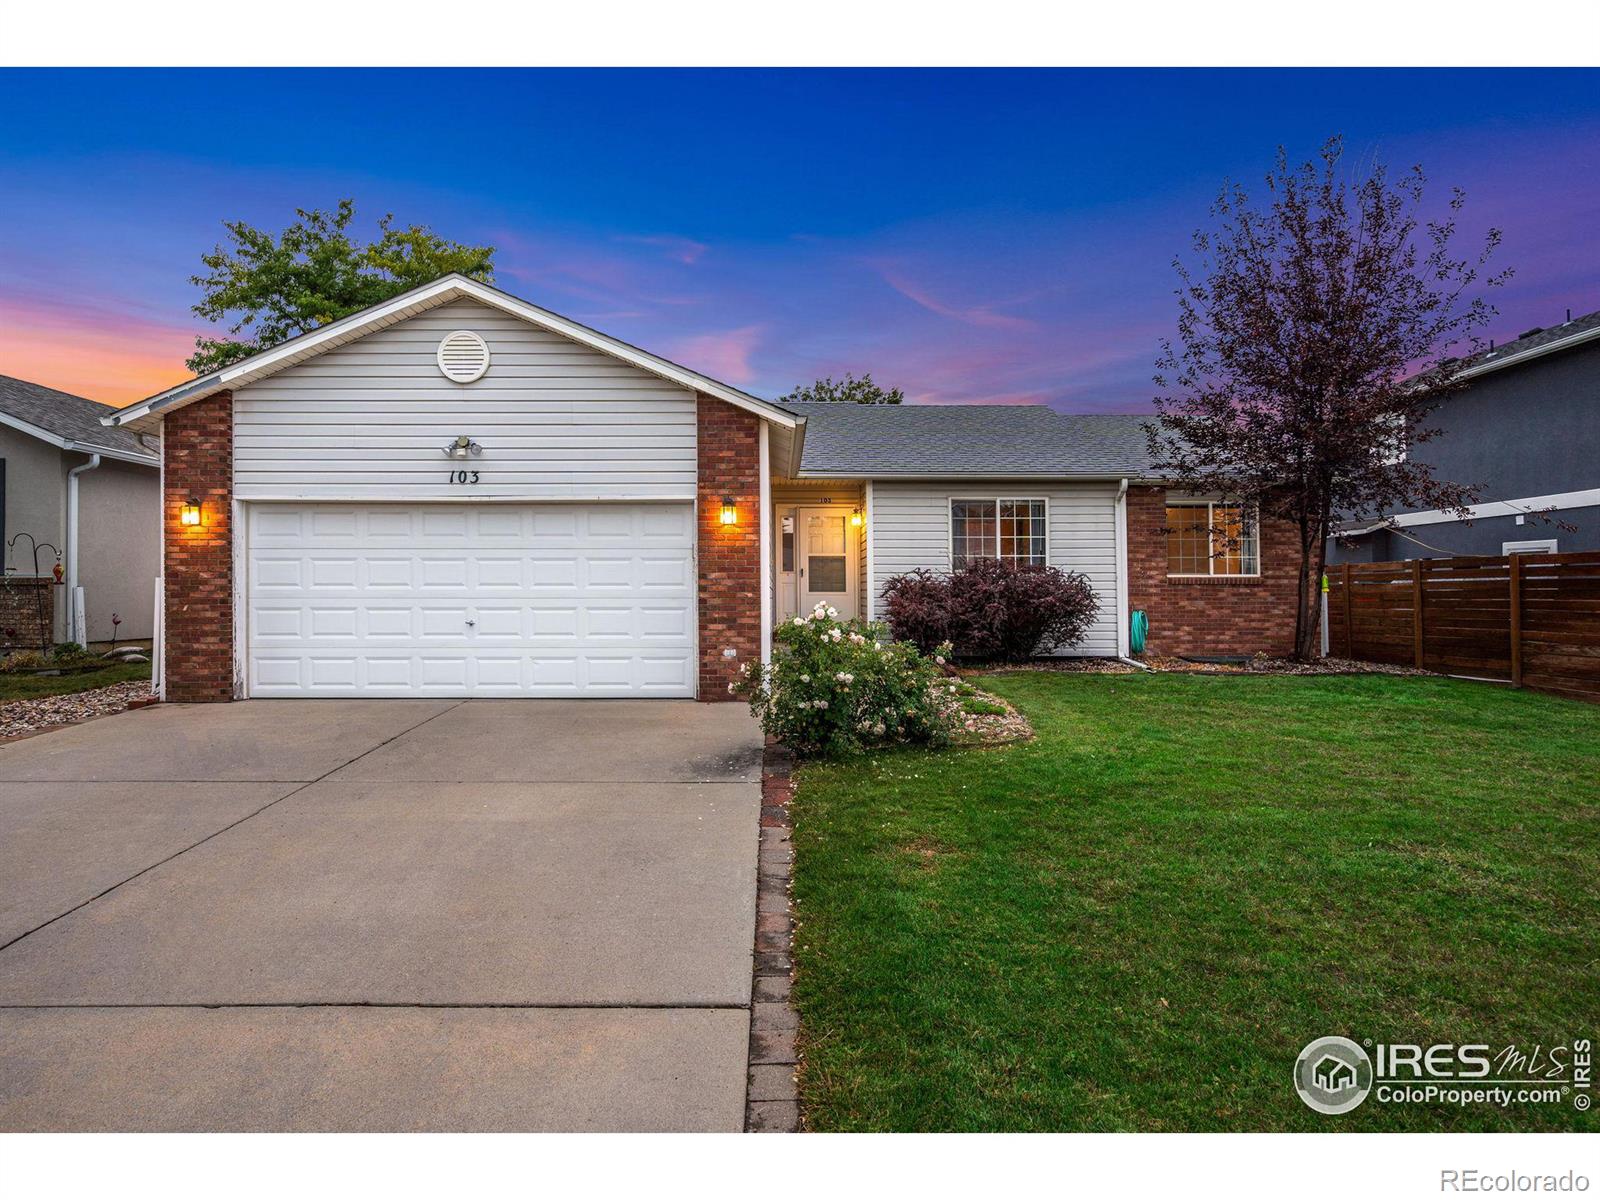 103  50th Avenue, greeley MLS: 123456789996482 Beds: 3 Baths: 2 Price: $390,000